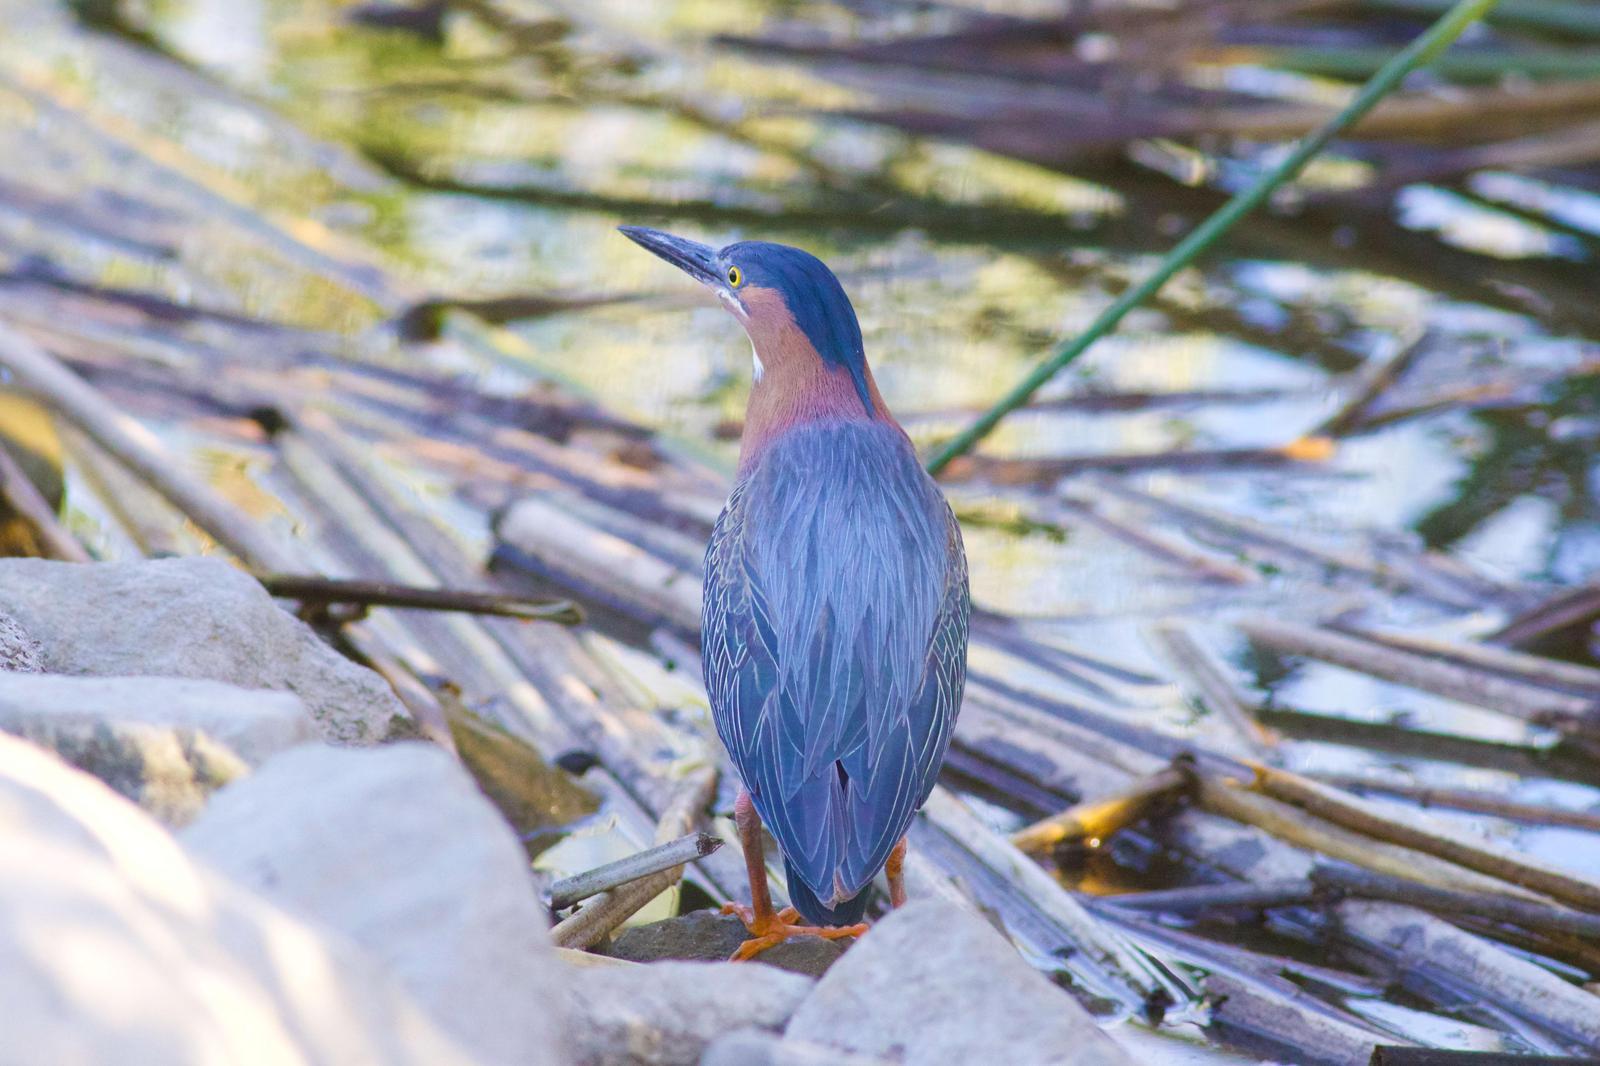 Green Heron Photo by Tom Ford-Hutchinson